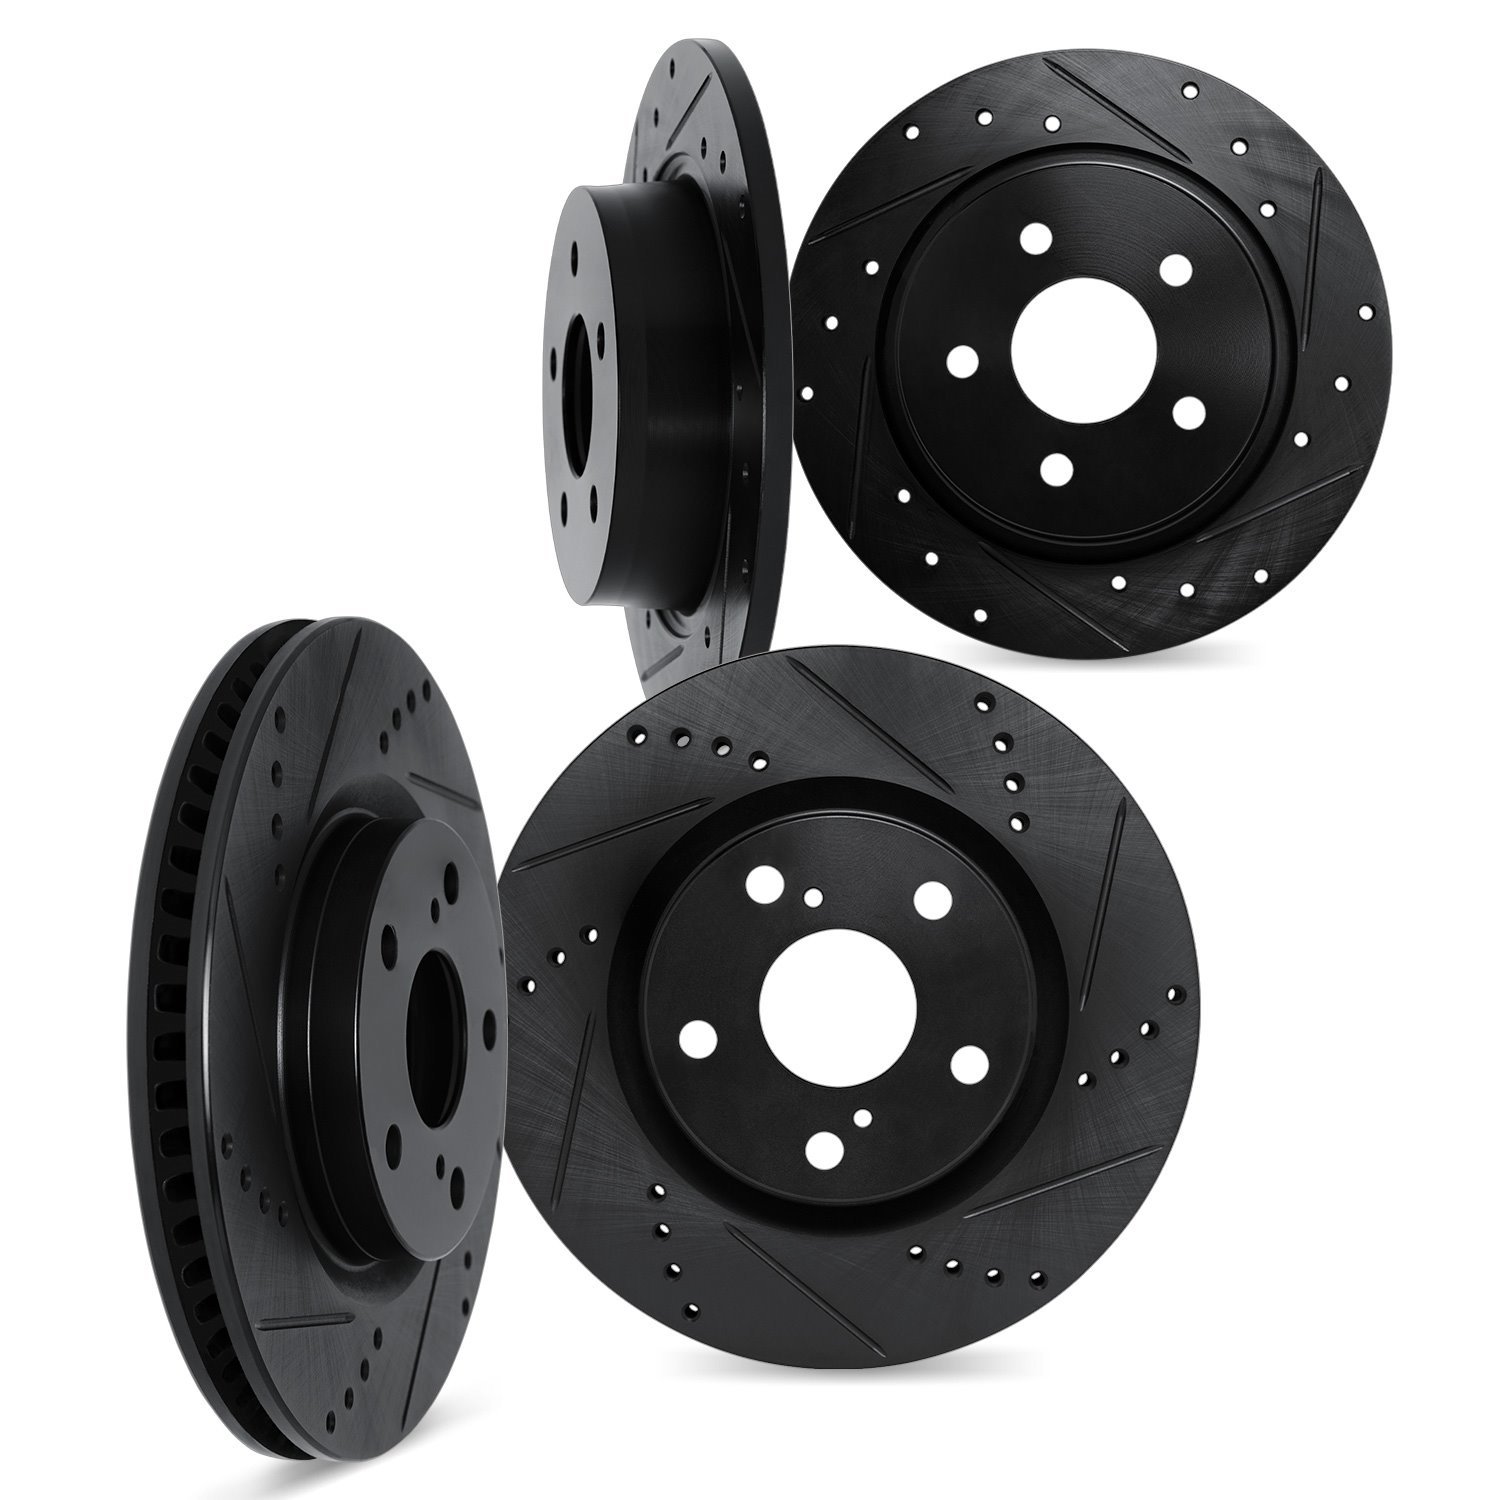 8004-75030 Drilled/Slotted Brake Rotors [Black], Fits Select Lexus/Toyota/Scion, Position: Front and Rear